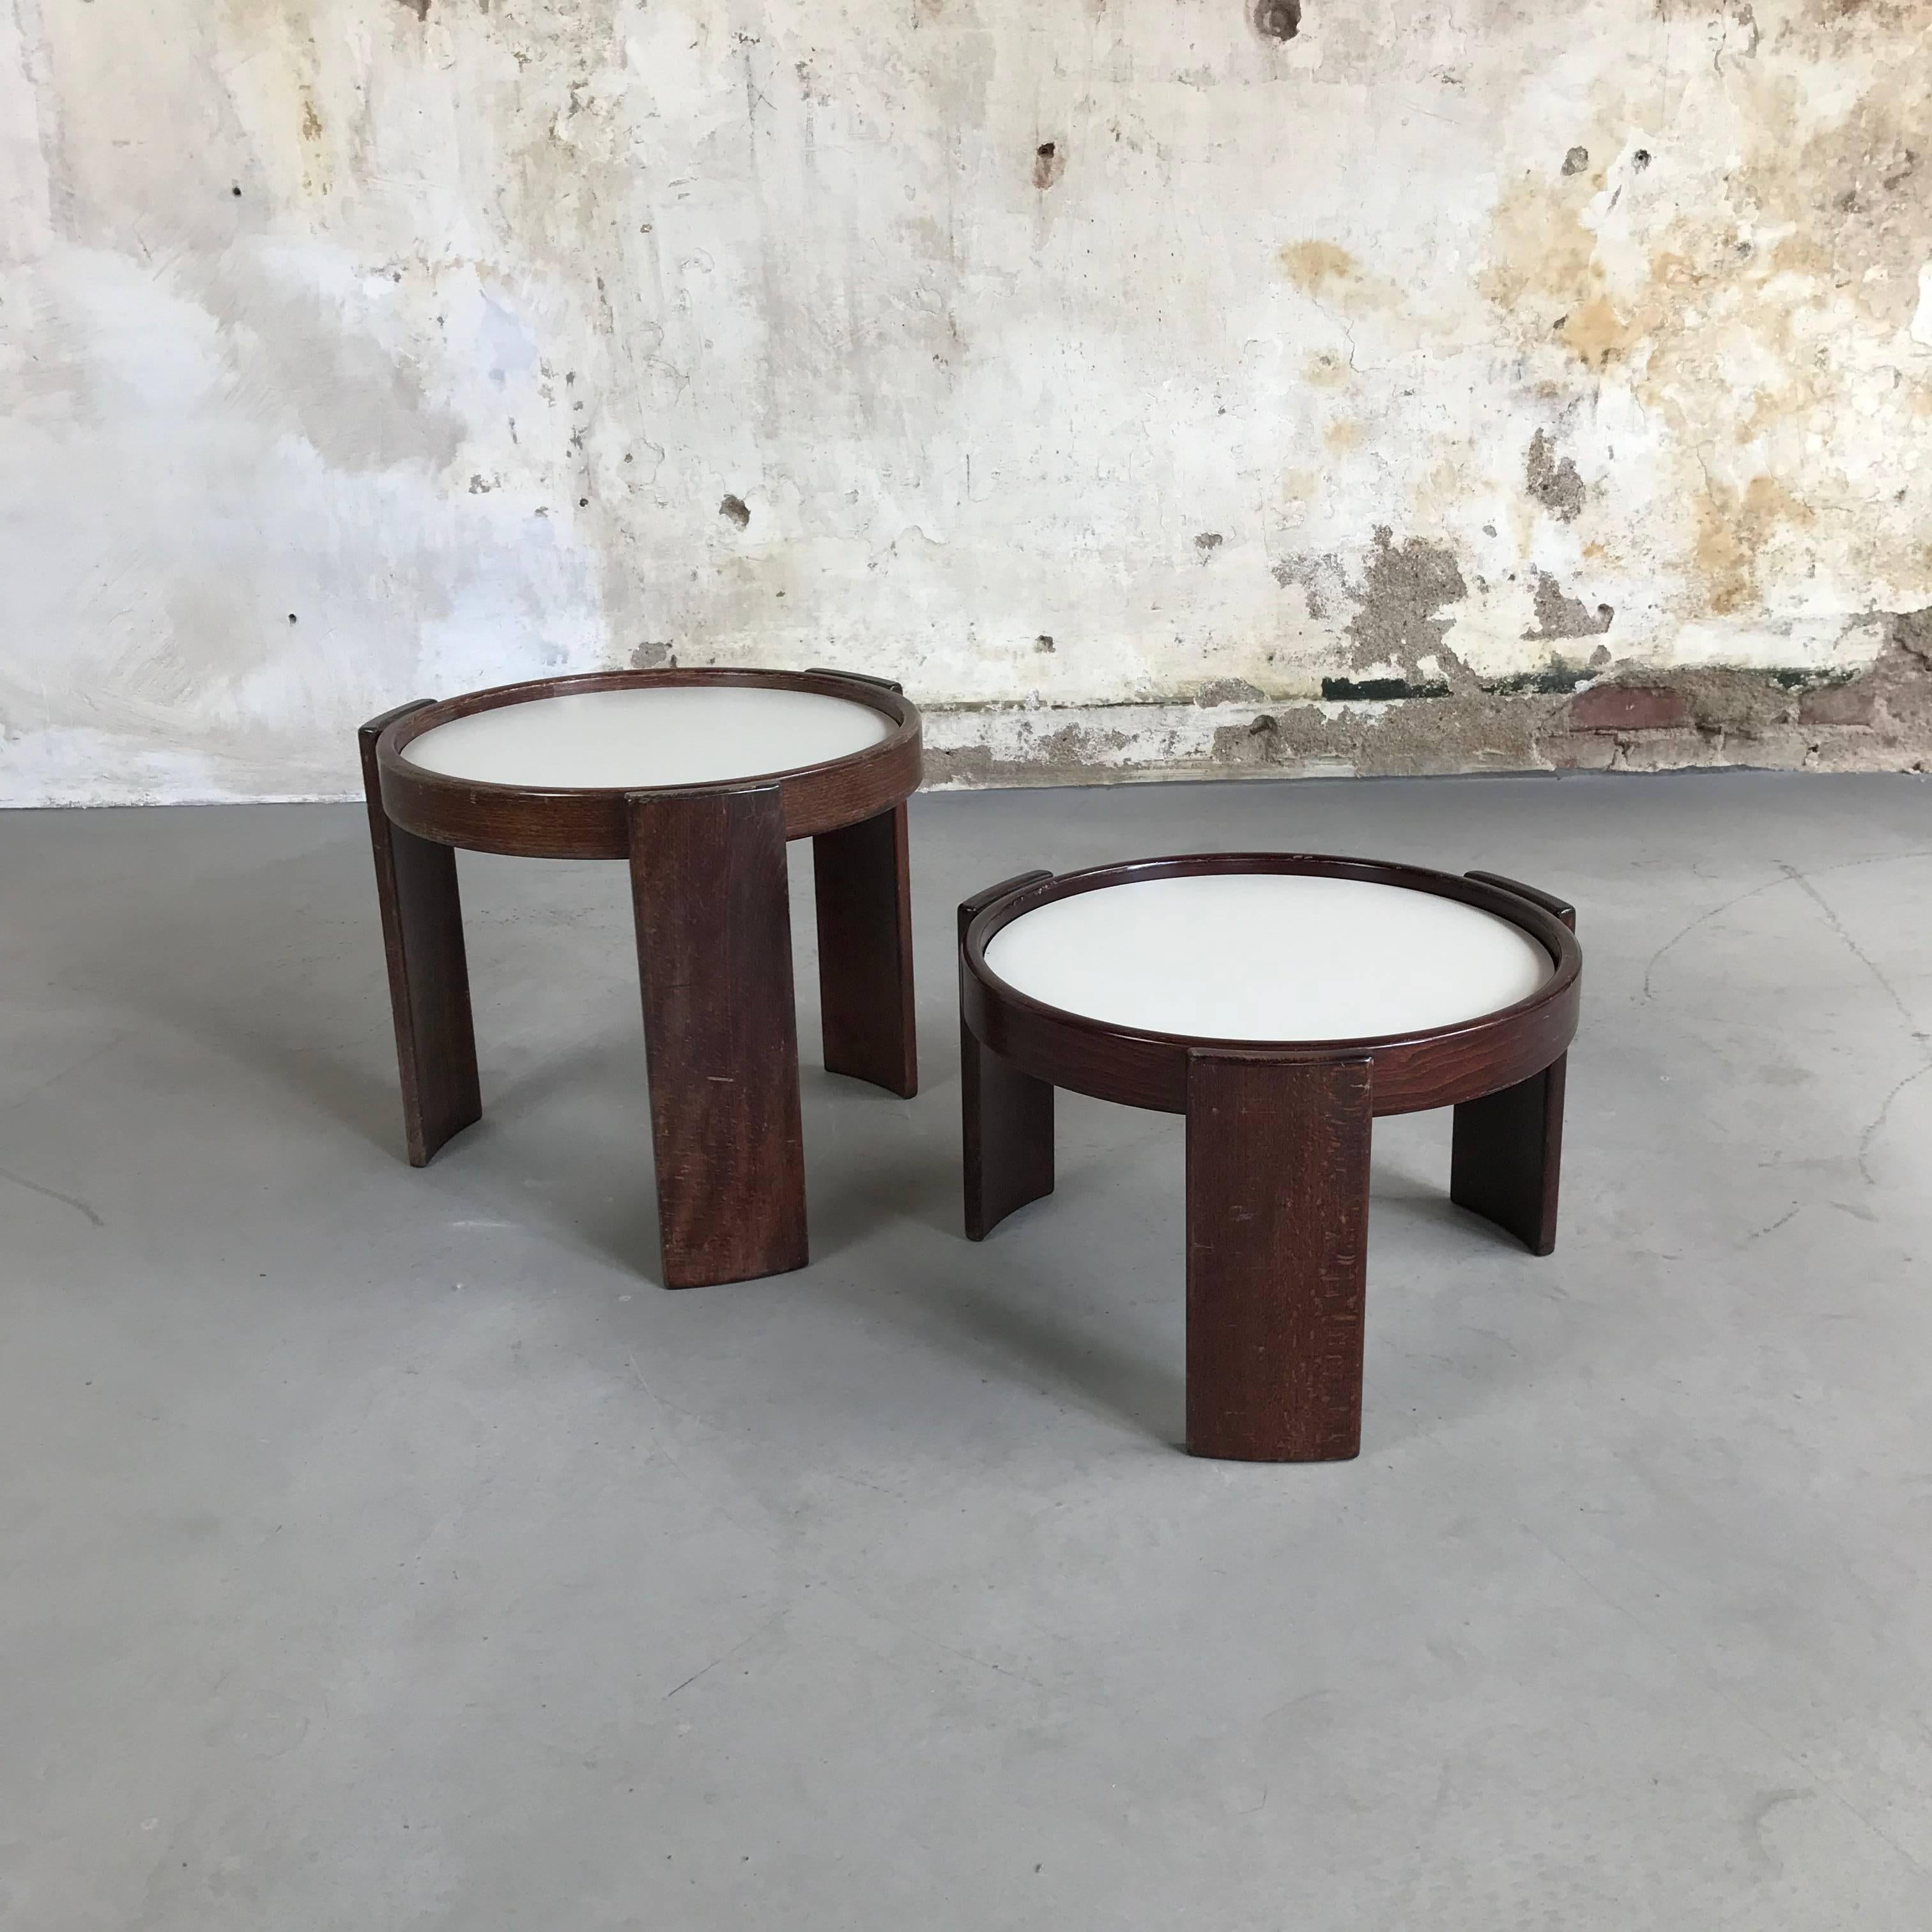 Nice vintage set of two stacking low tables (modelno 783) in beechwood stained walnut lacquered. 
Reversible laminate top: one side white and one side black.
Designed in 1966 by Gianfranco Frattini for Cassina. 
Both tables are marked with a